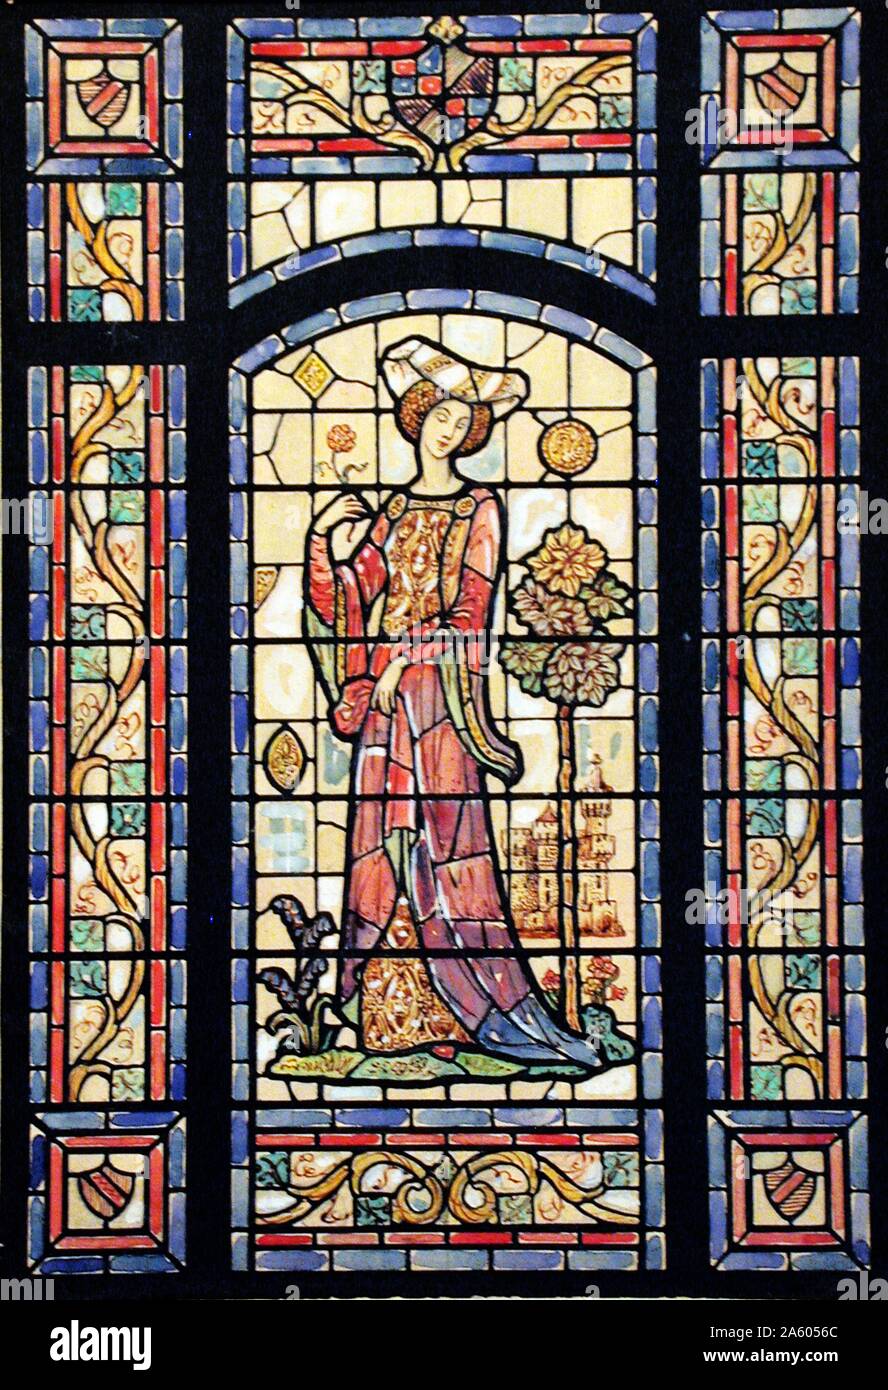 A stained glass window for C.F. Bohn Residence in Grosse Pointe, Michigan. It shows a romantic Medieval lady with headdress. 1911 Stock Photo